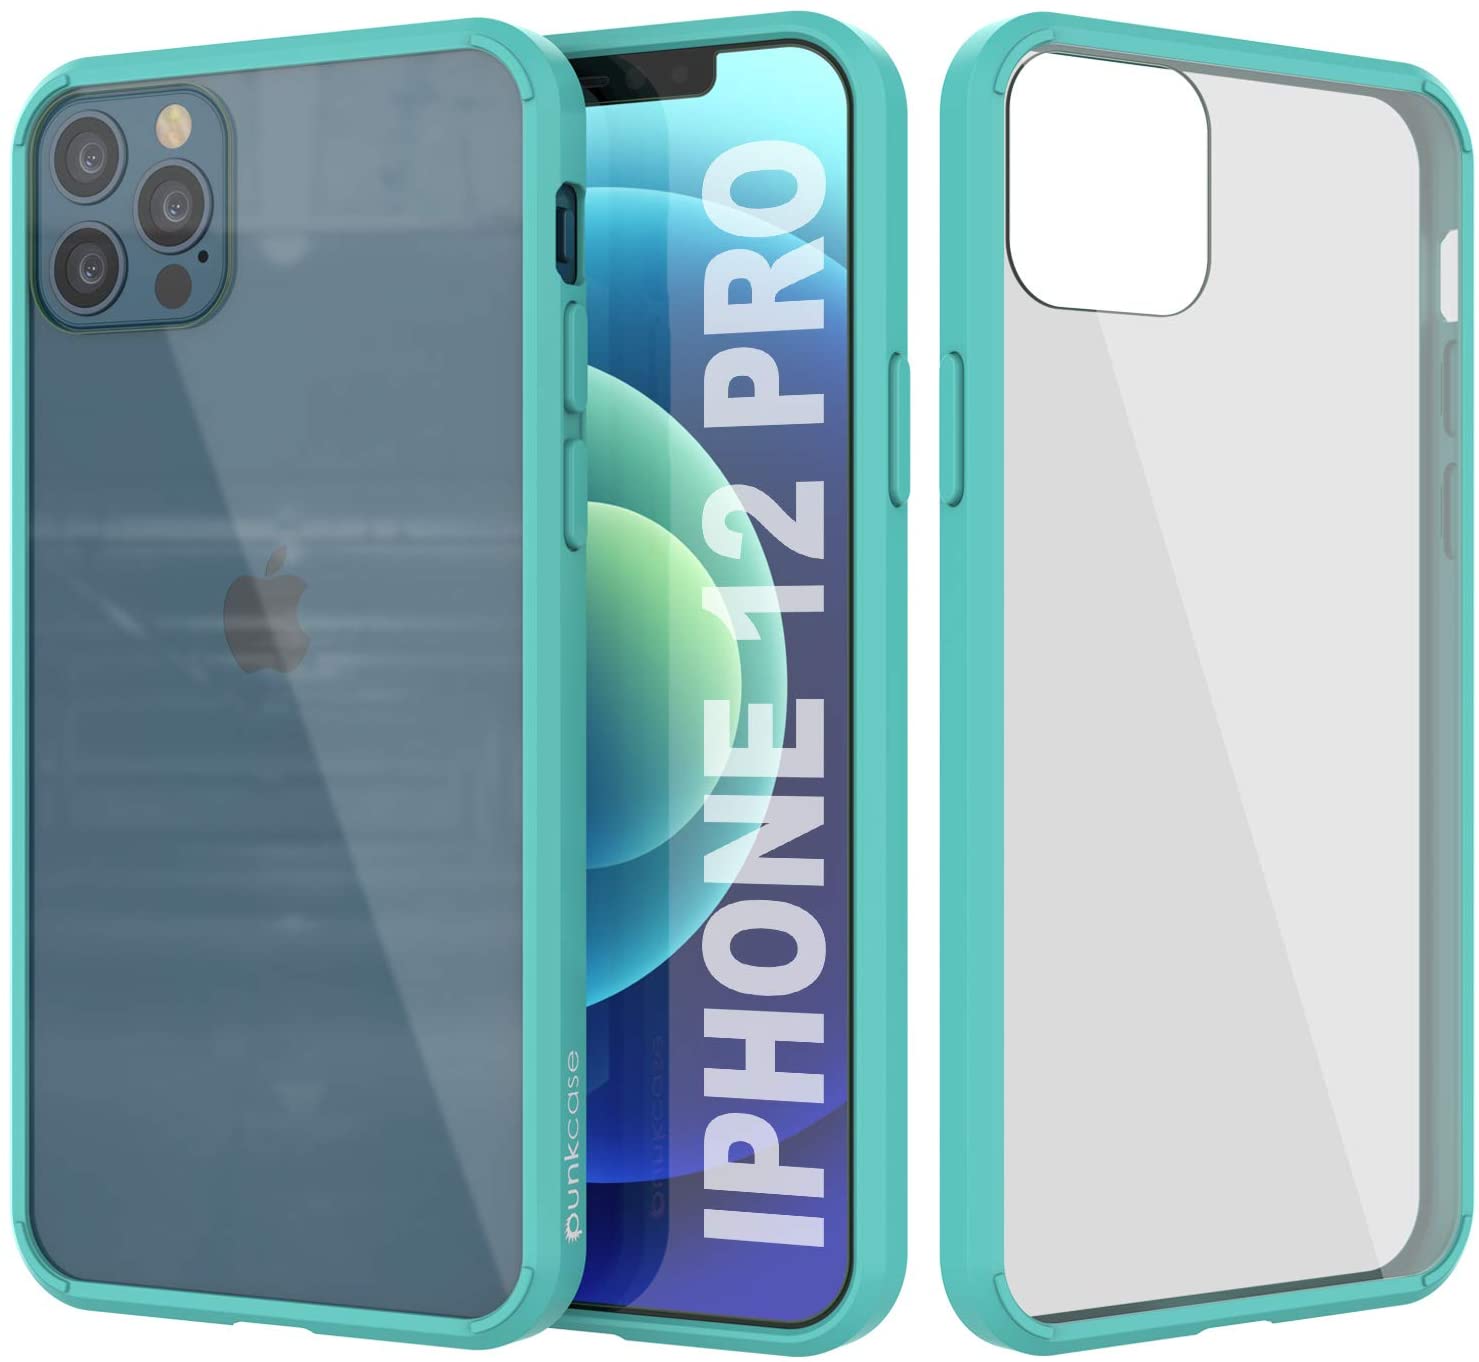 iPhone 12 & iPhone 12 Pro: Best Glass Screen Protector + Case